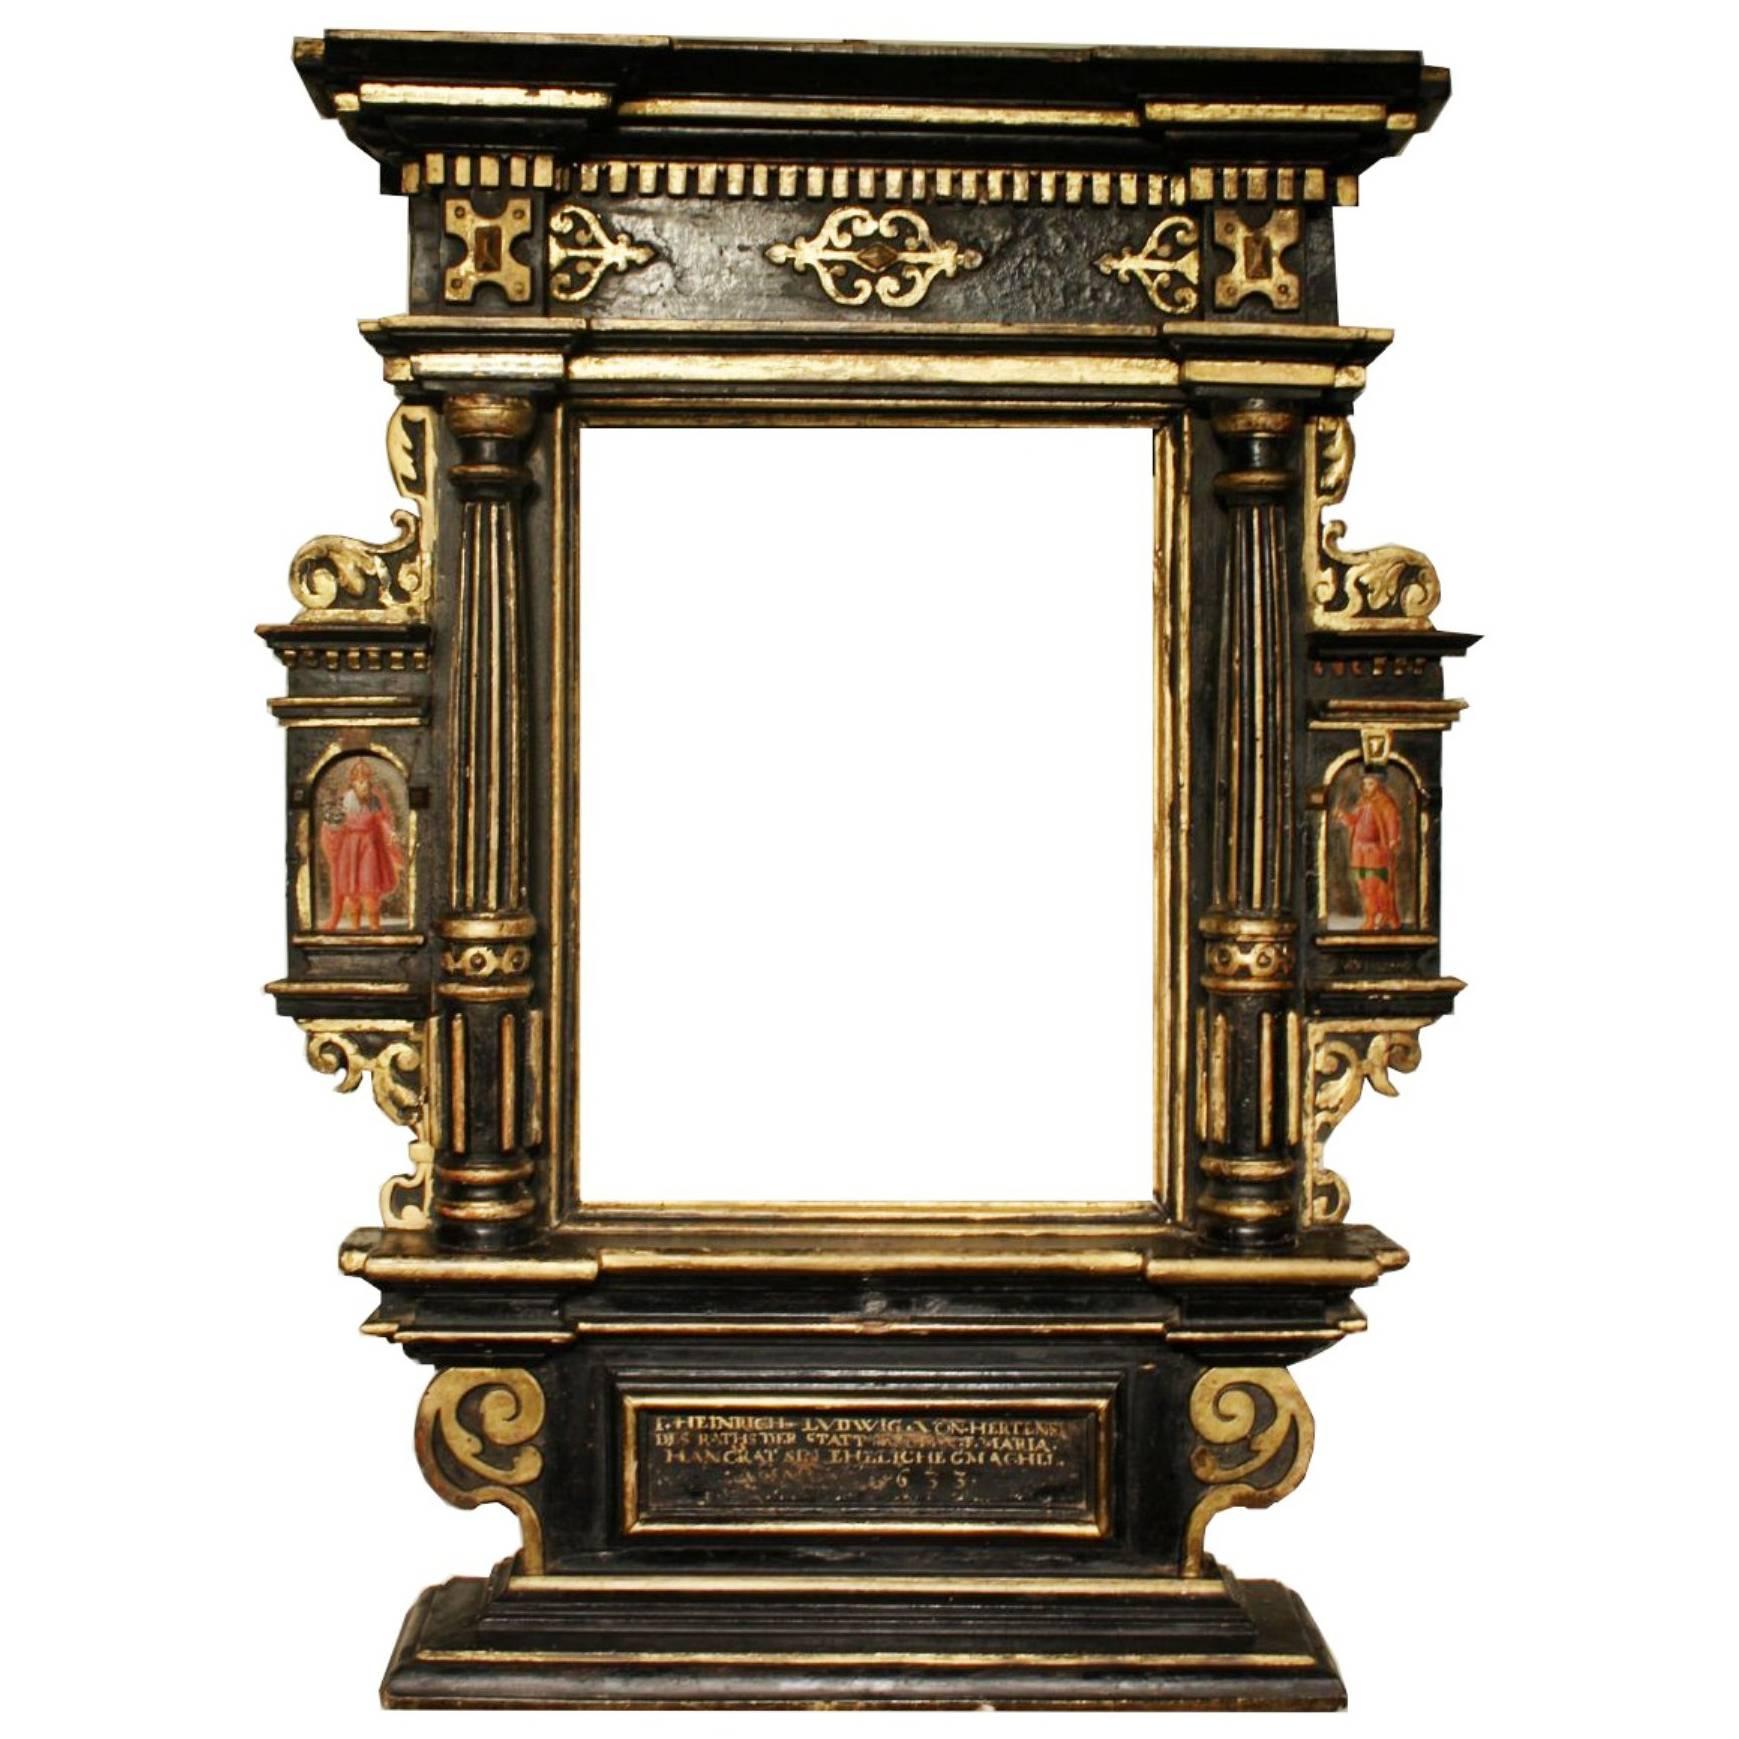 Very Rare 17th Century Tabernacle Frame Mounted as Mirror, Germany, Dated 1633